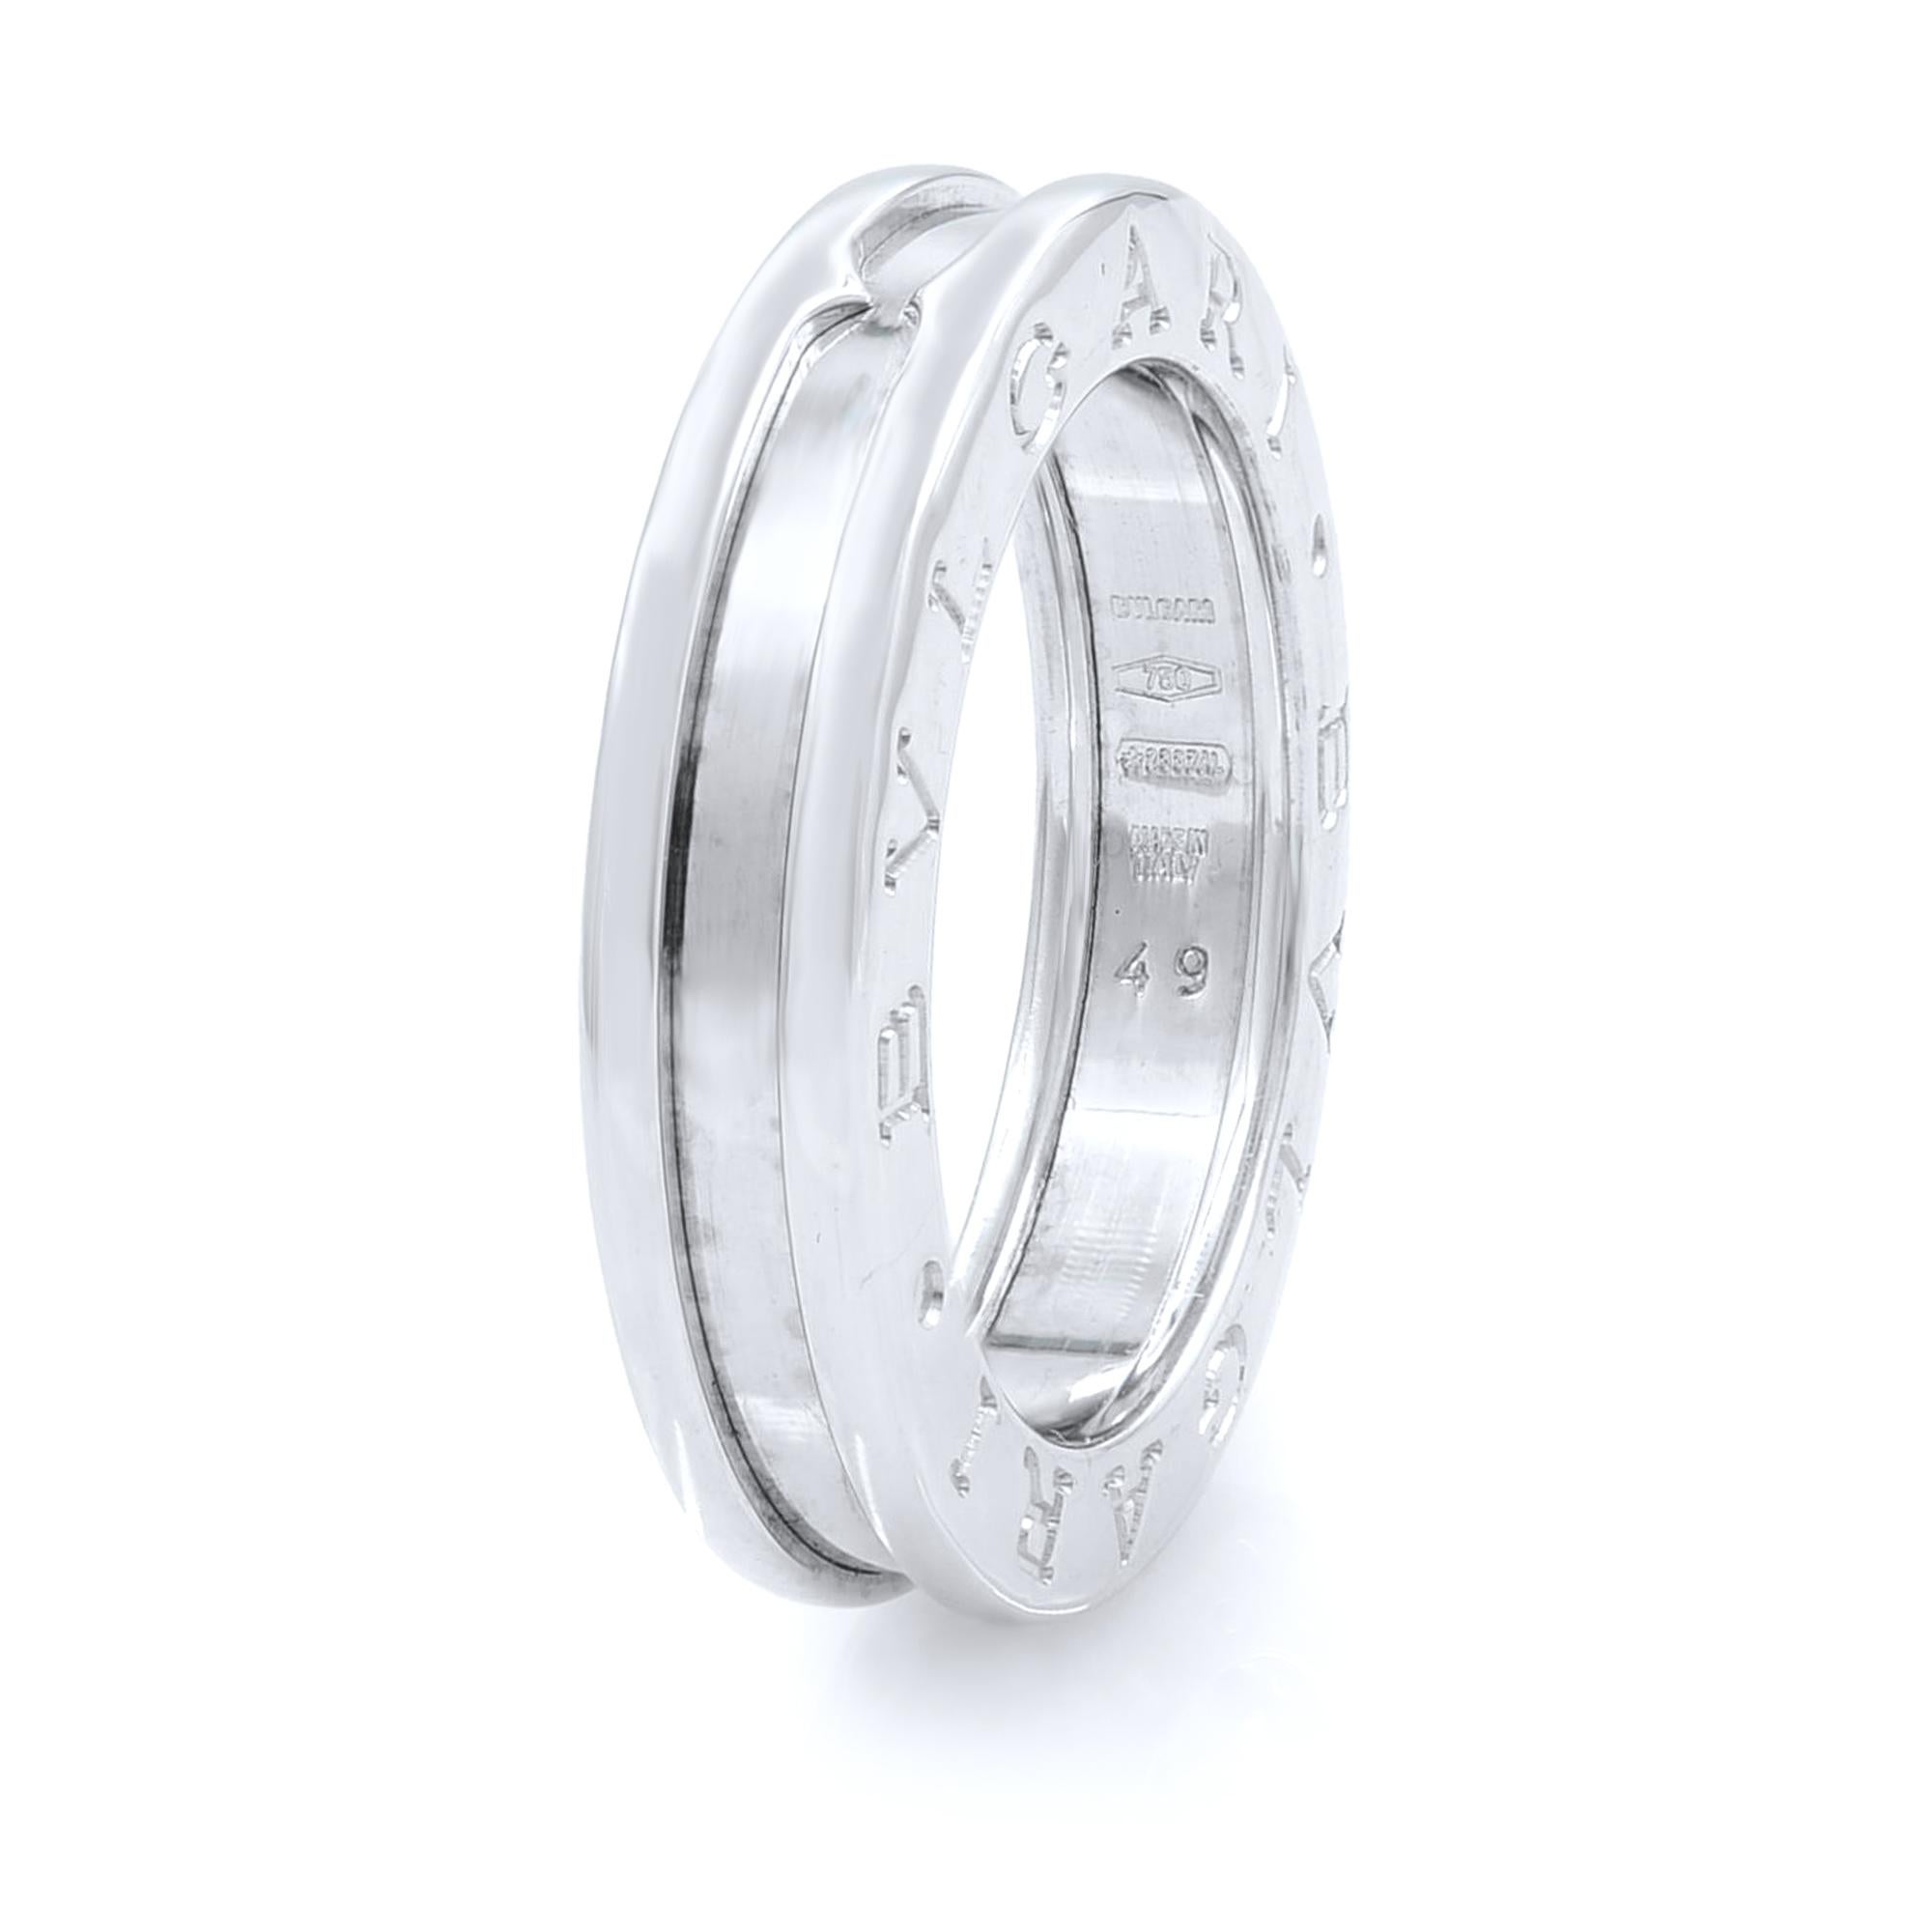 Bvlgari B.Zero 1 18K White Gold Ring SZ5

The B.Zero ring is a signature piece from the legendary jewelry design house Bvlgari. It features a clean, modern design with a white gold central band surrounded by two white gold rims with the BVLGARI logo